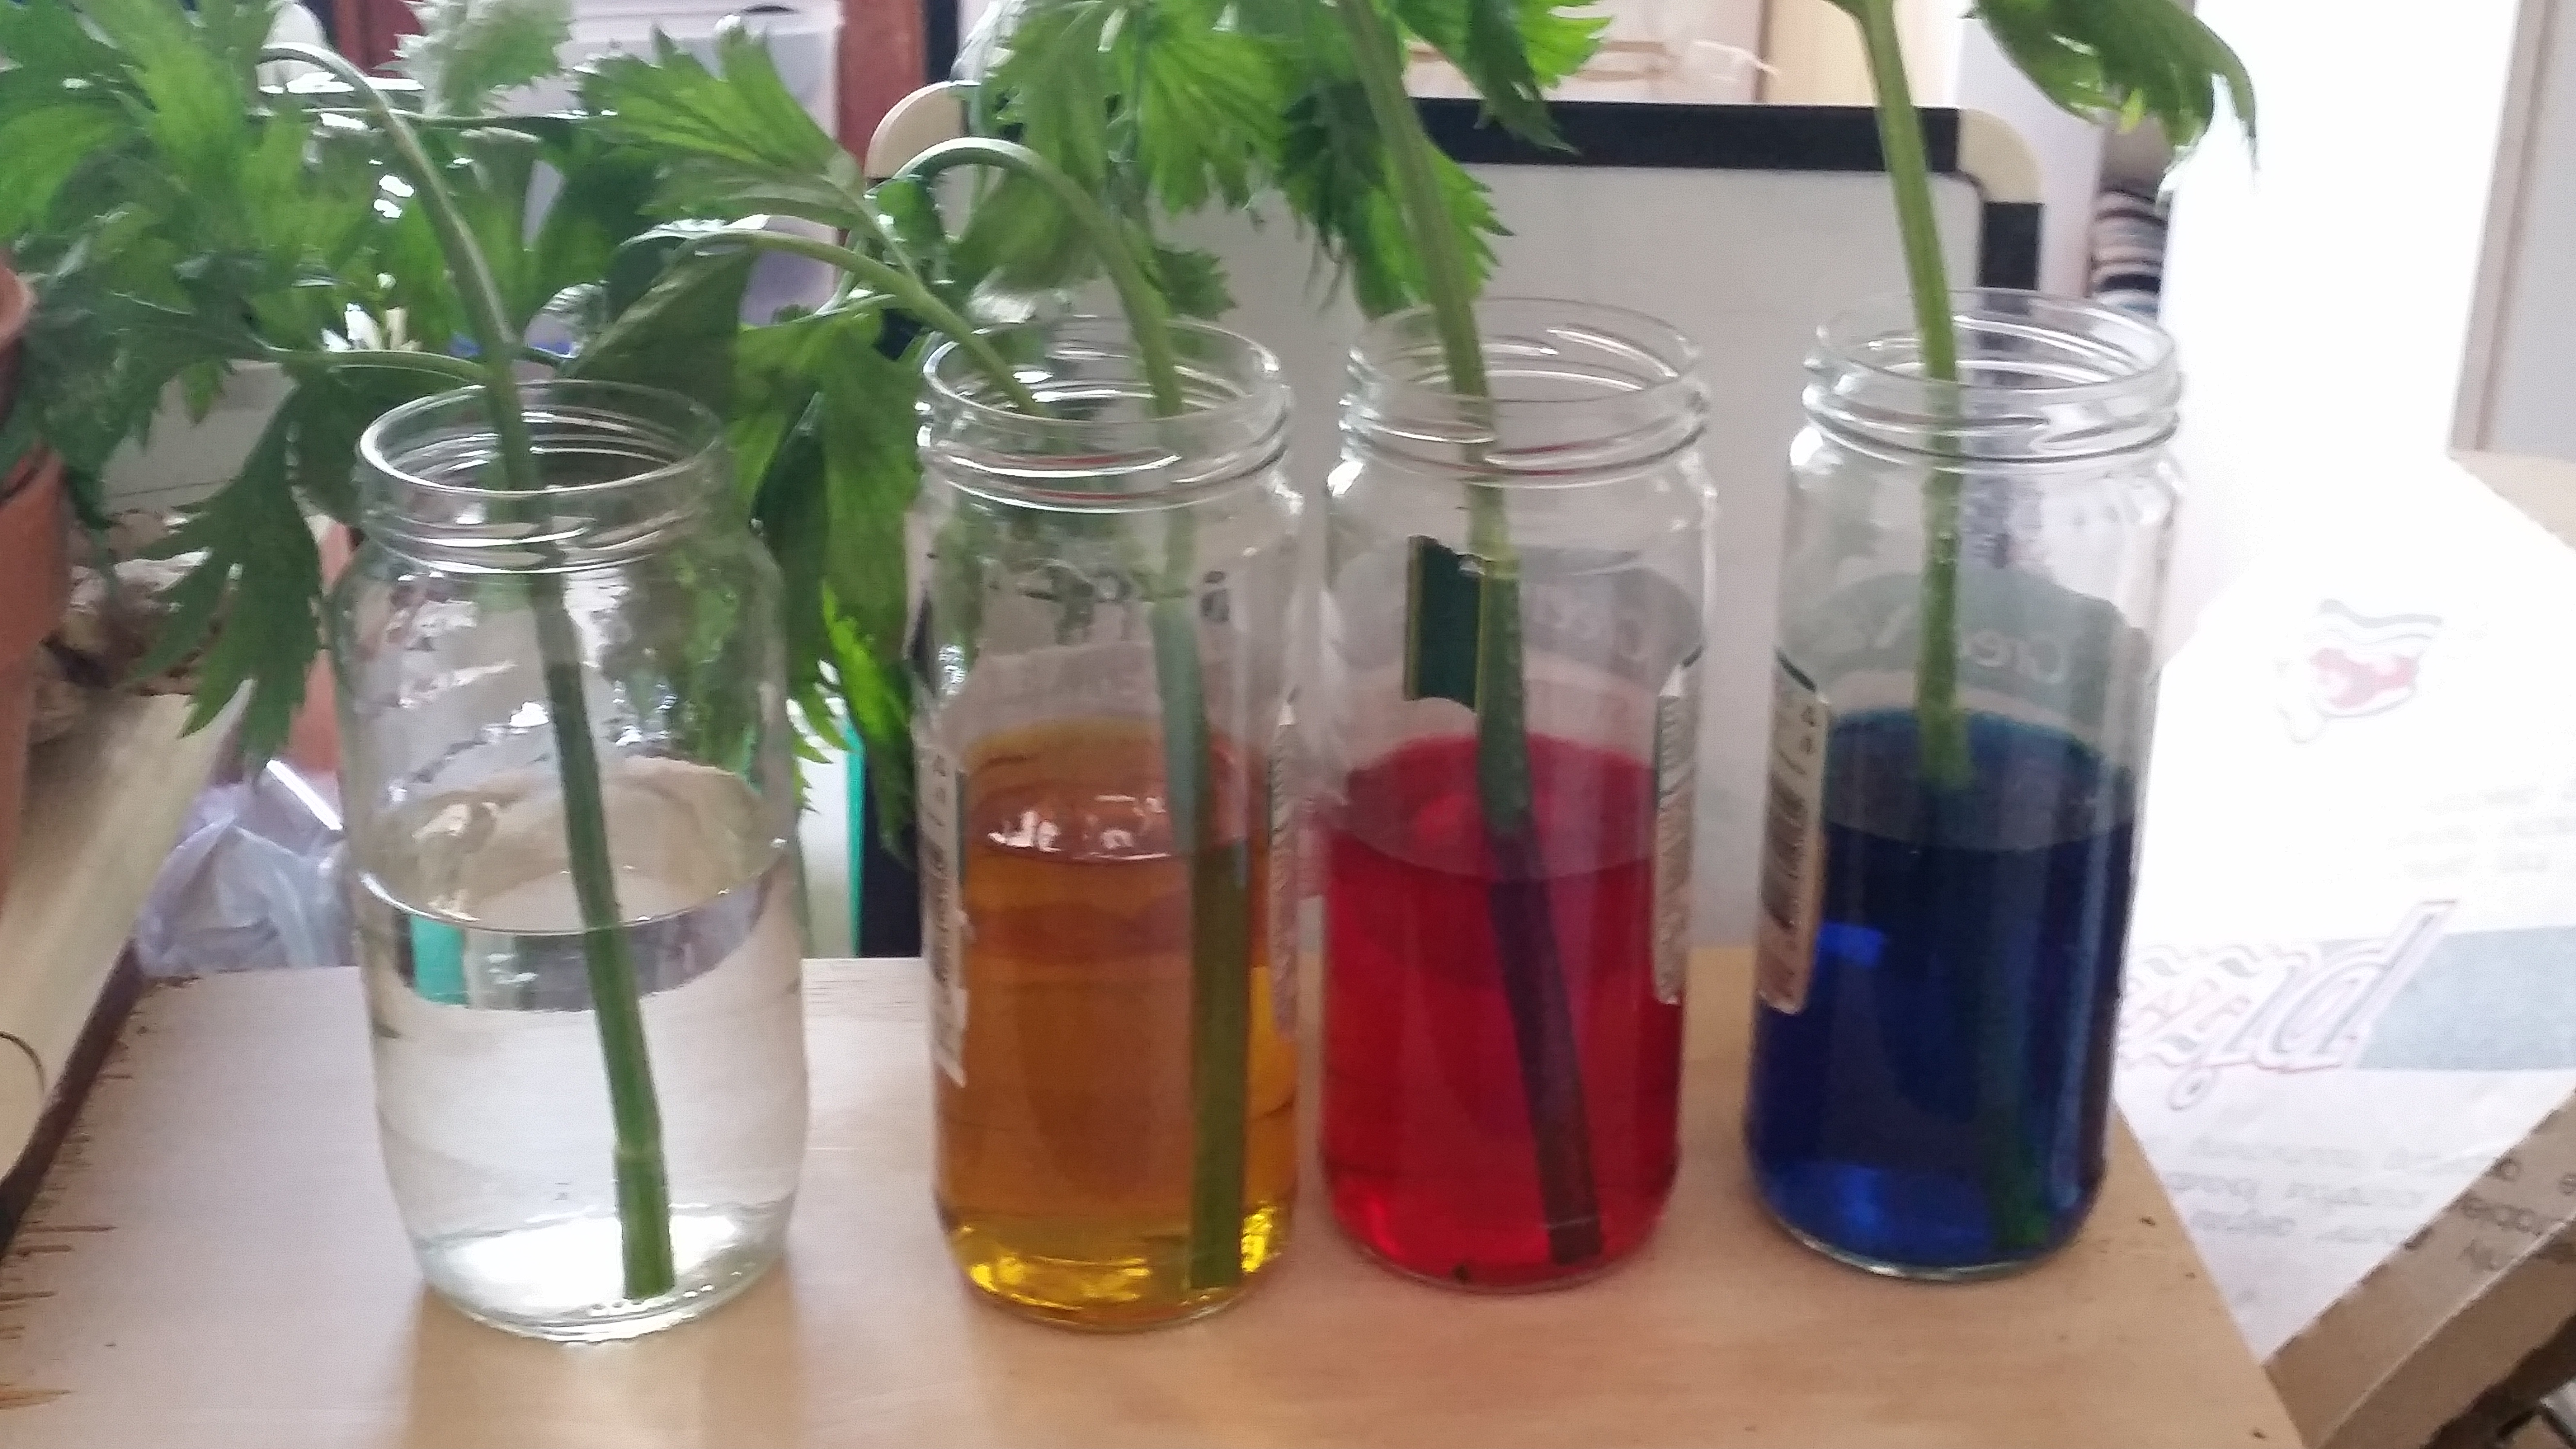 Experiment – Celery in Different Colored Water